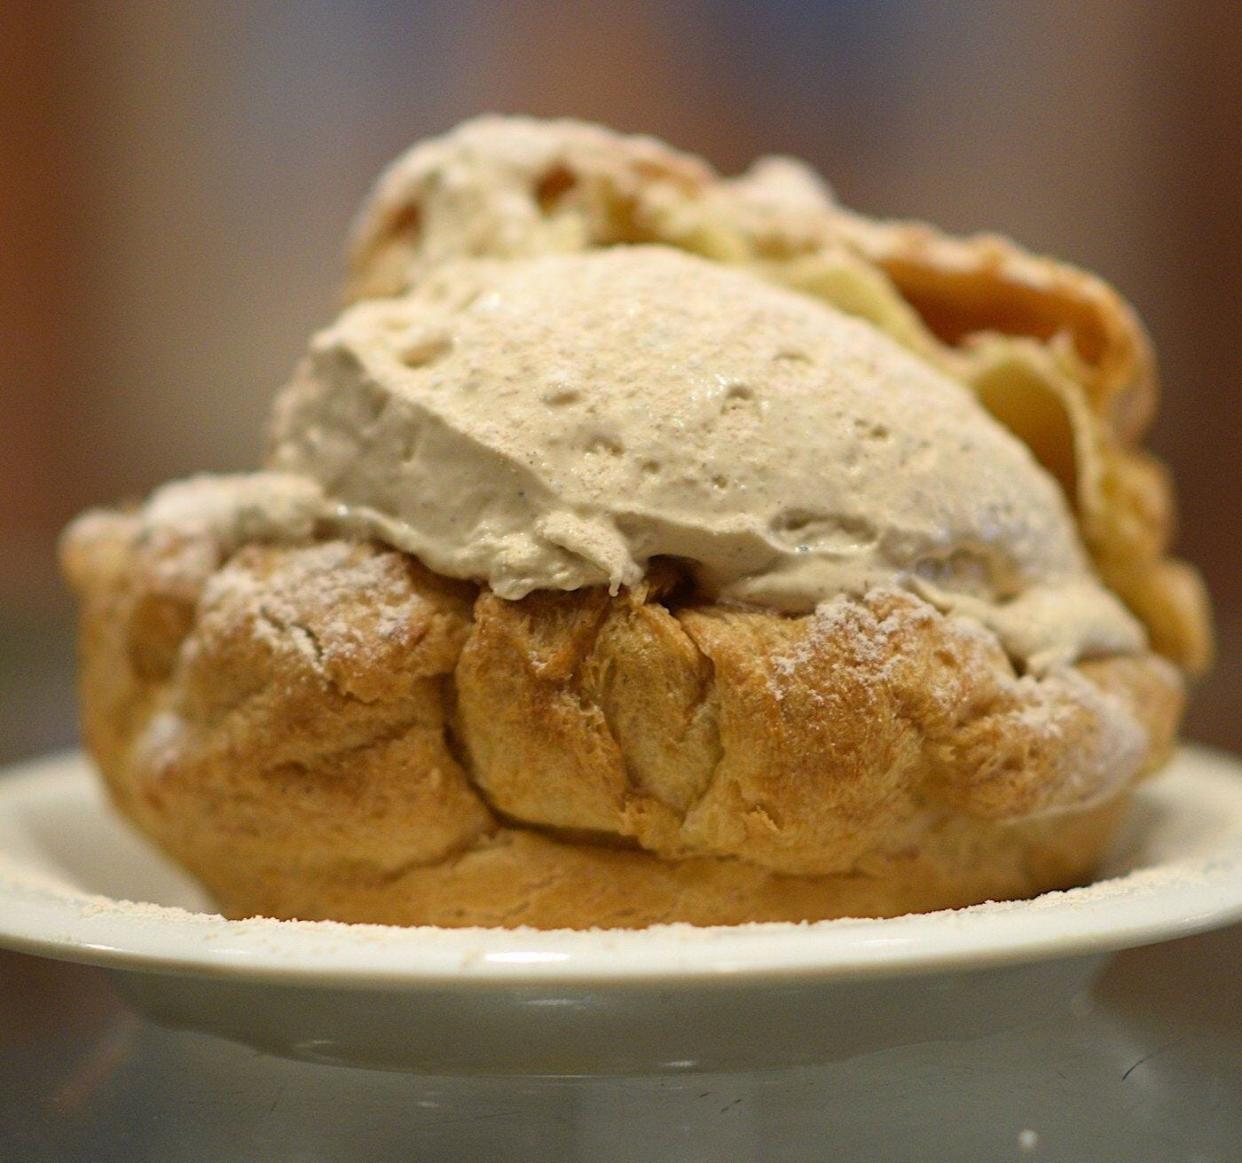 Schmidt's sticks to its German roots with a Pfeffernüsse-flavored cream puff for the holidays.